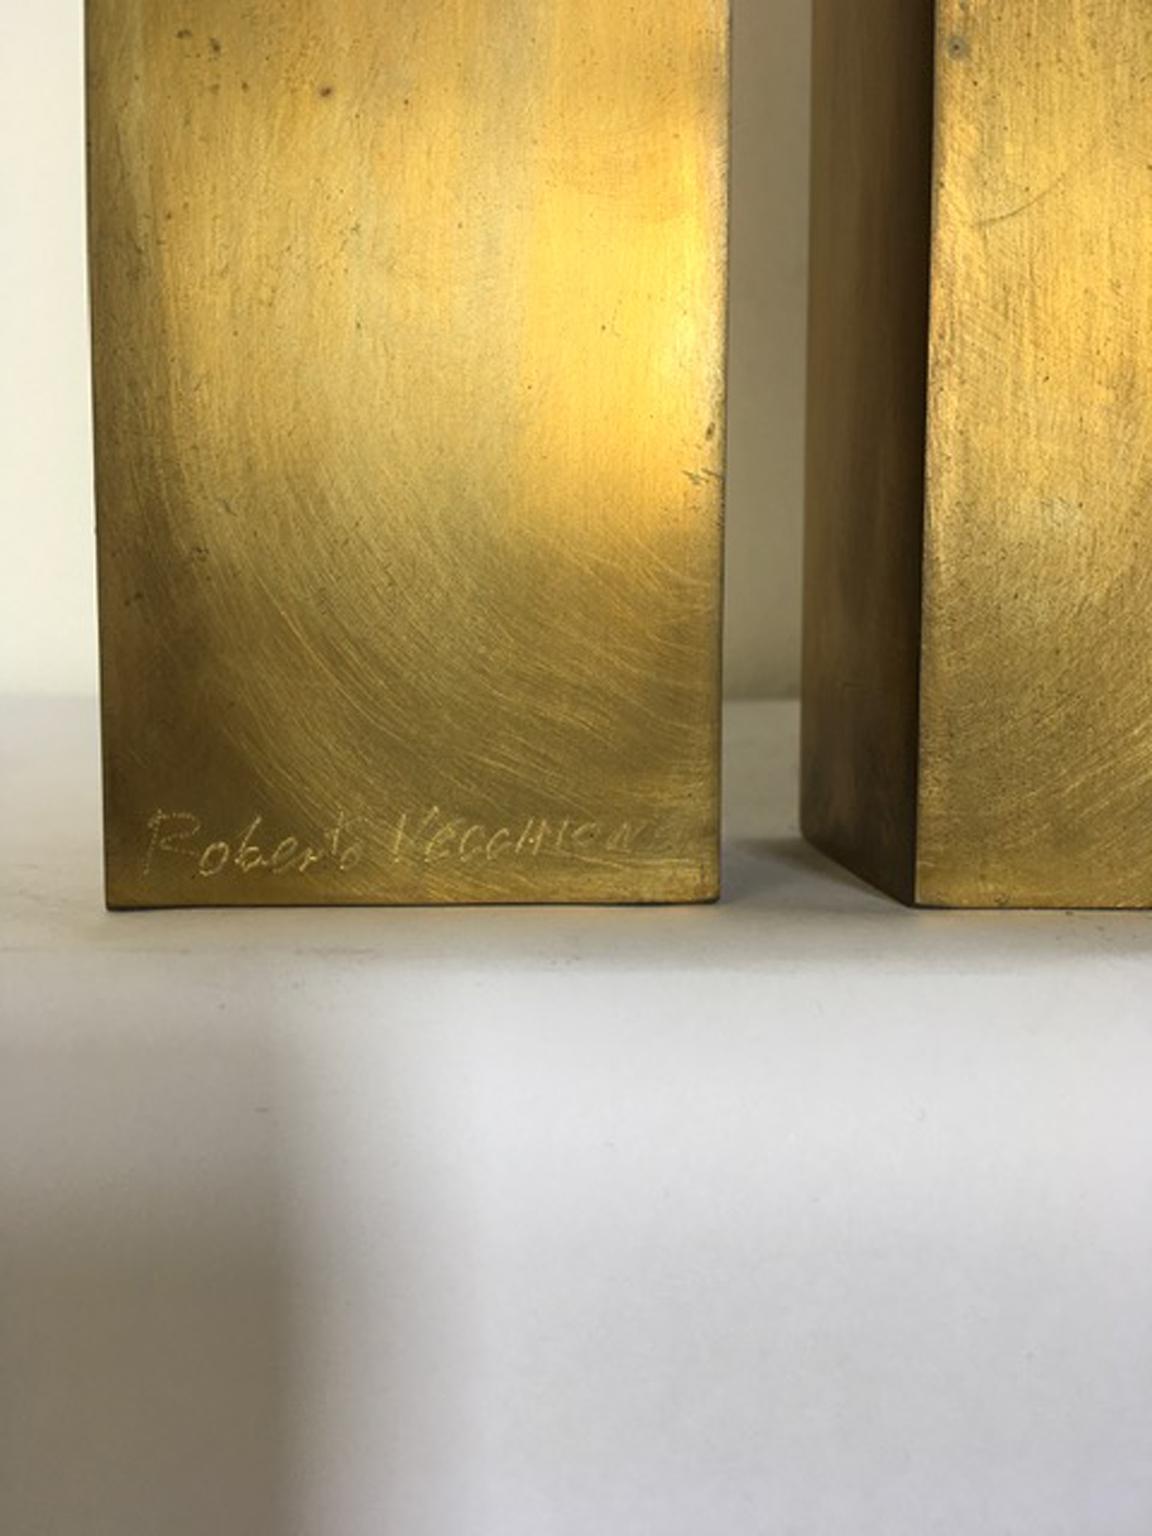 Italy 1998 the Skyscrapers Brass Abstract Sculpture For Sale 11